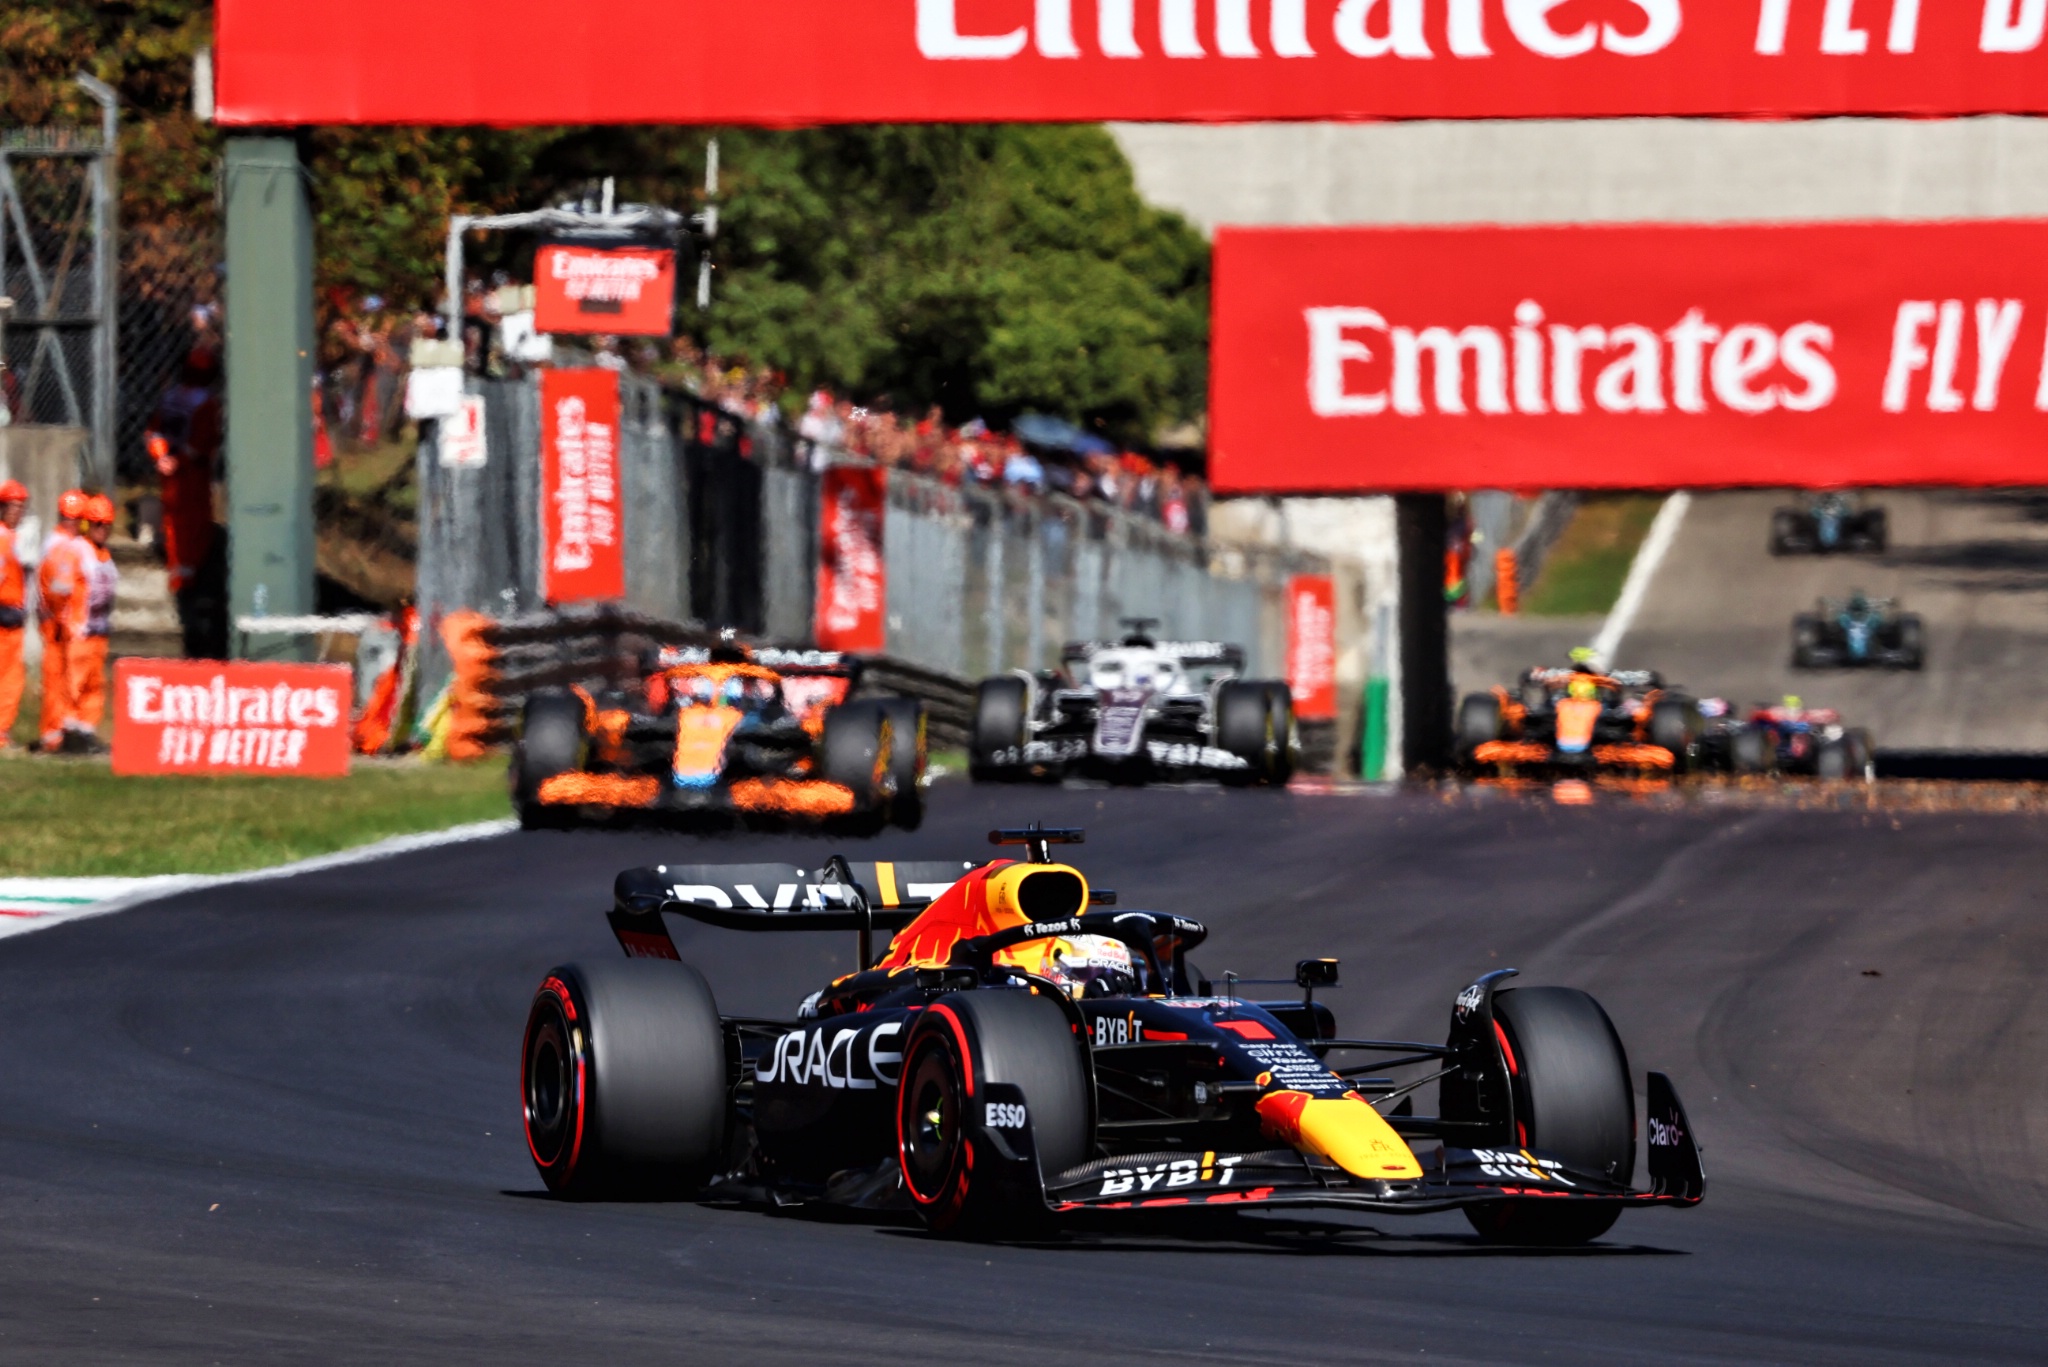 Betting odds for the Italian Grand Prix – Who is tipped for glory at Monza?